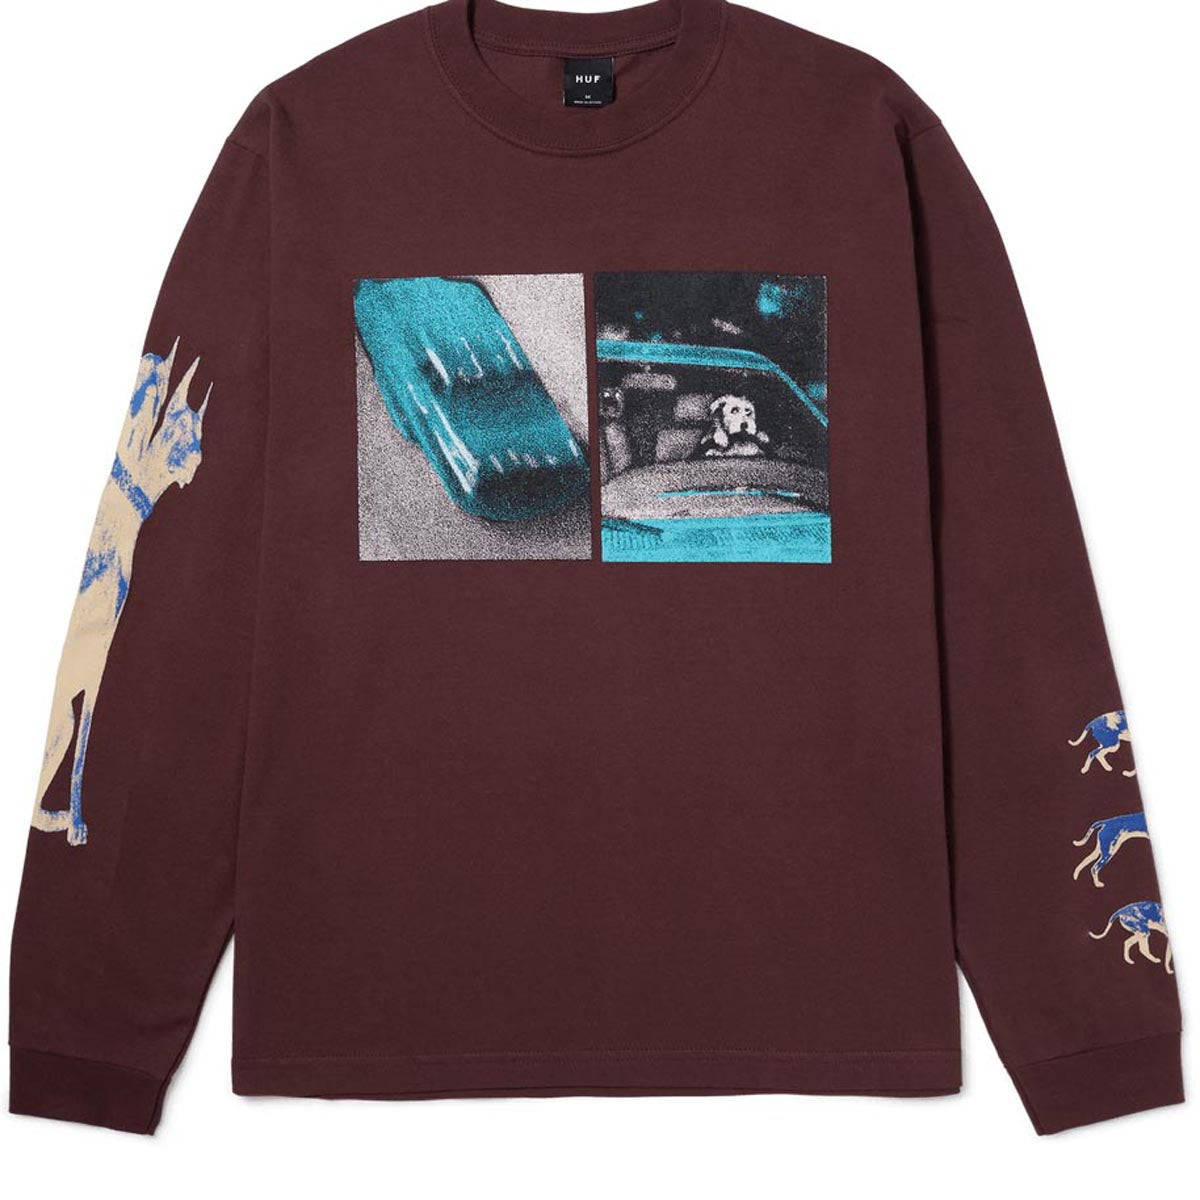 HUF Red Means Go Long Sleeve T-Shirt - Eggplant image 1